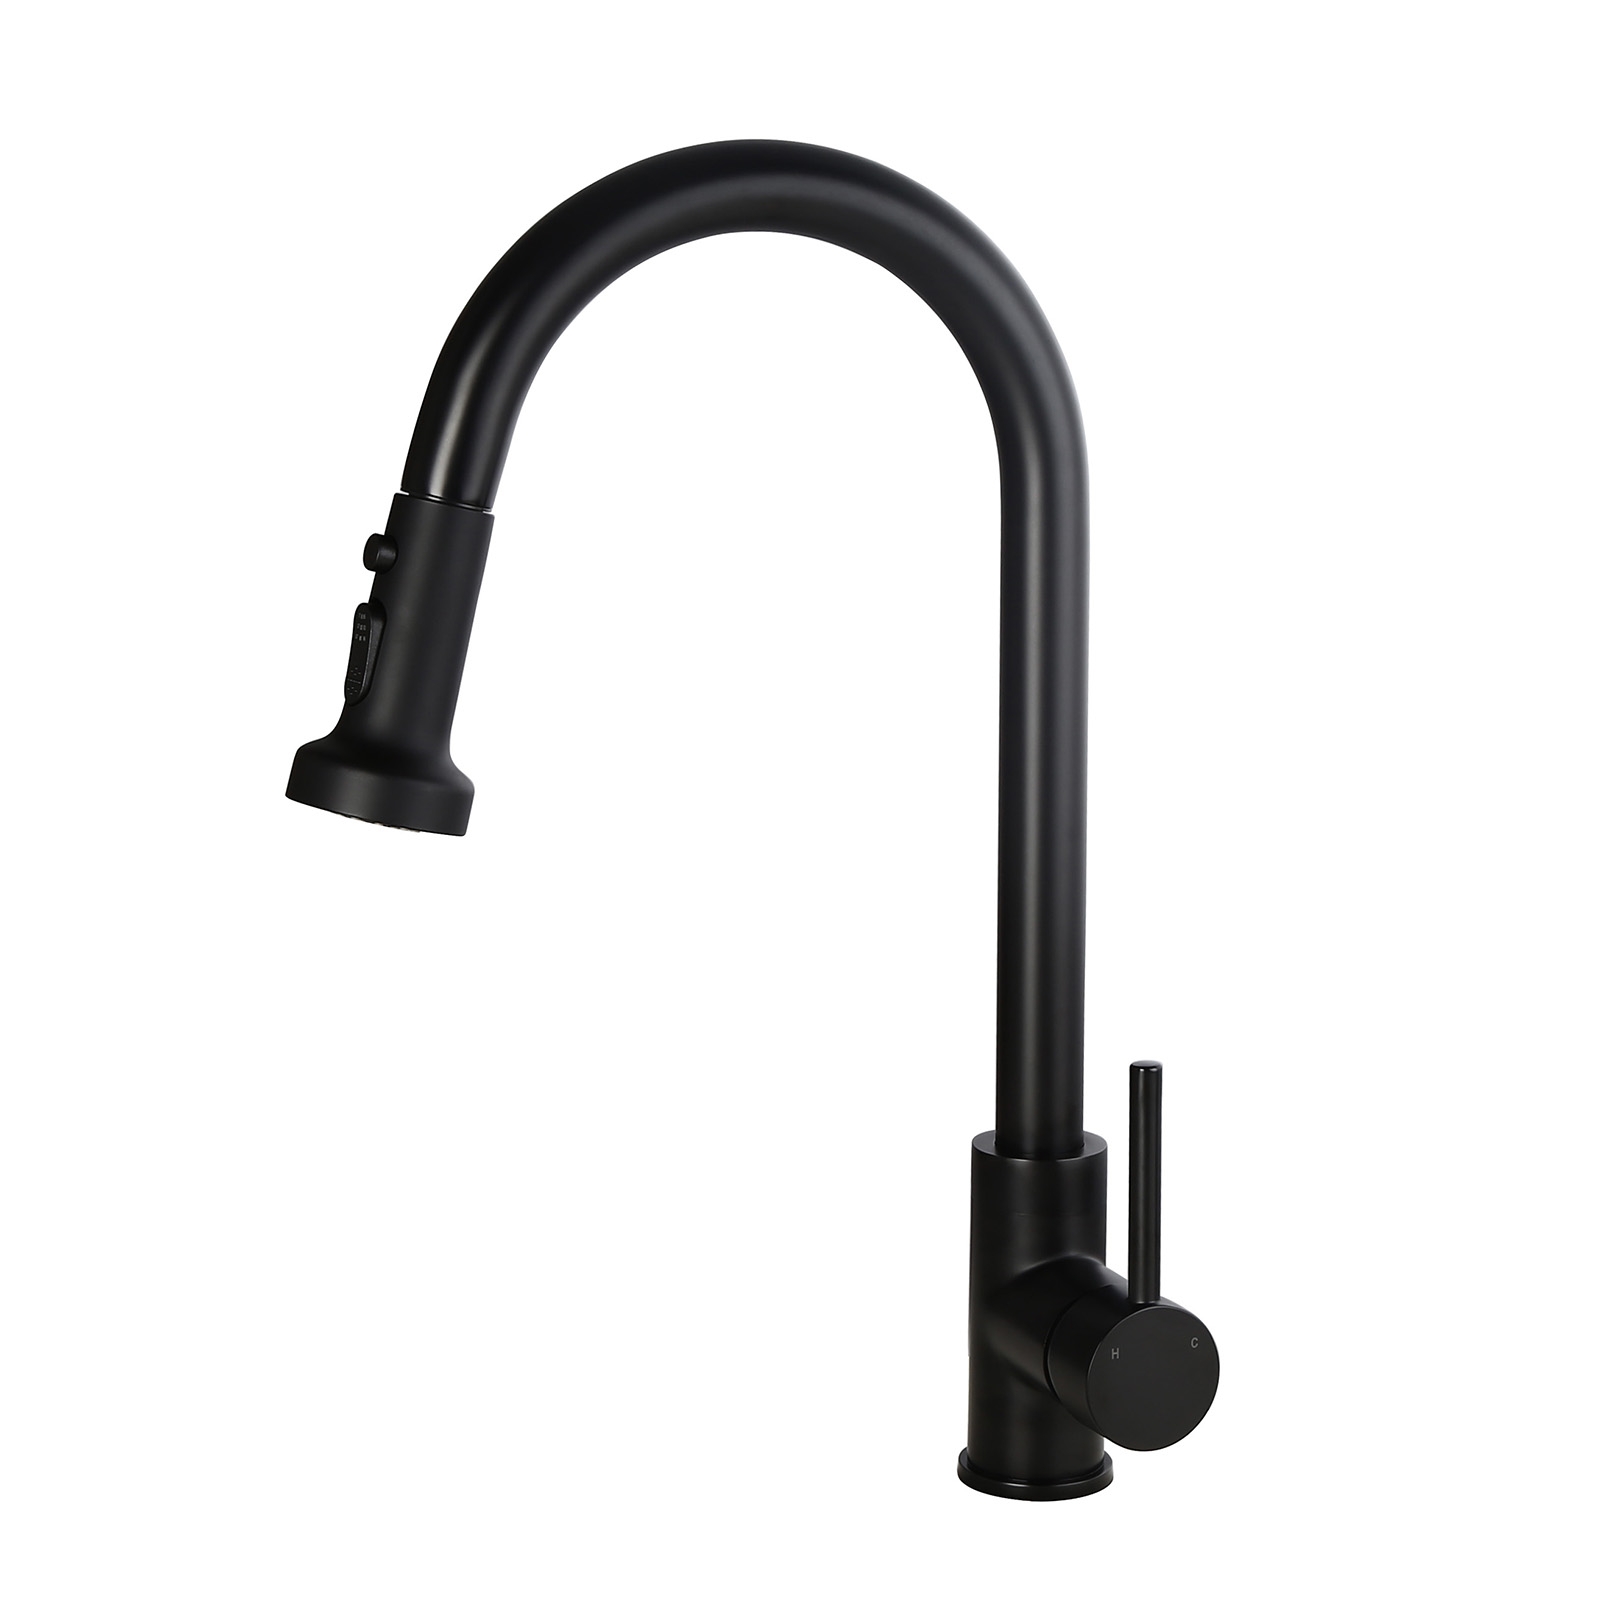 Commercial 3-Function Pull Down Spray Swivel Sprayhead Kitchen Sink Faucet with Deck Plate Matte Black Brass